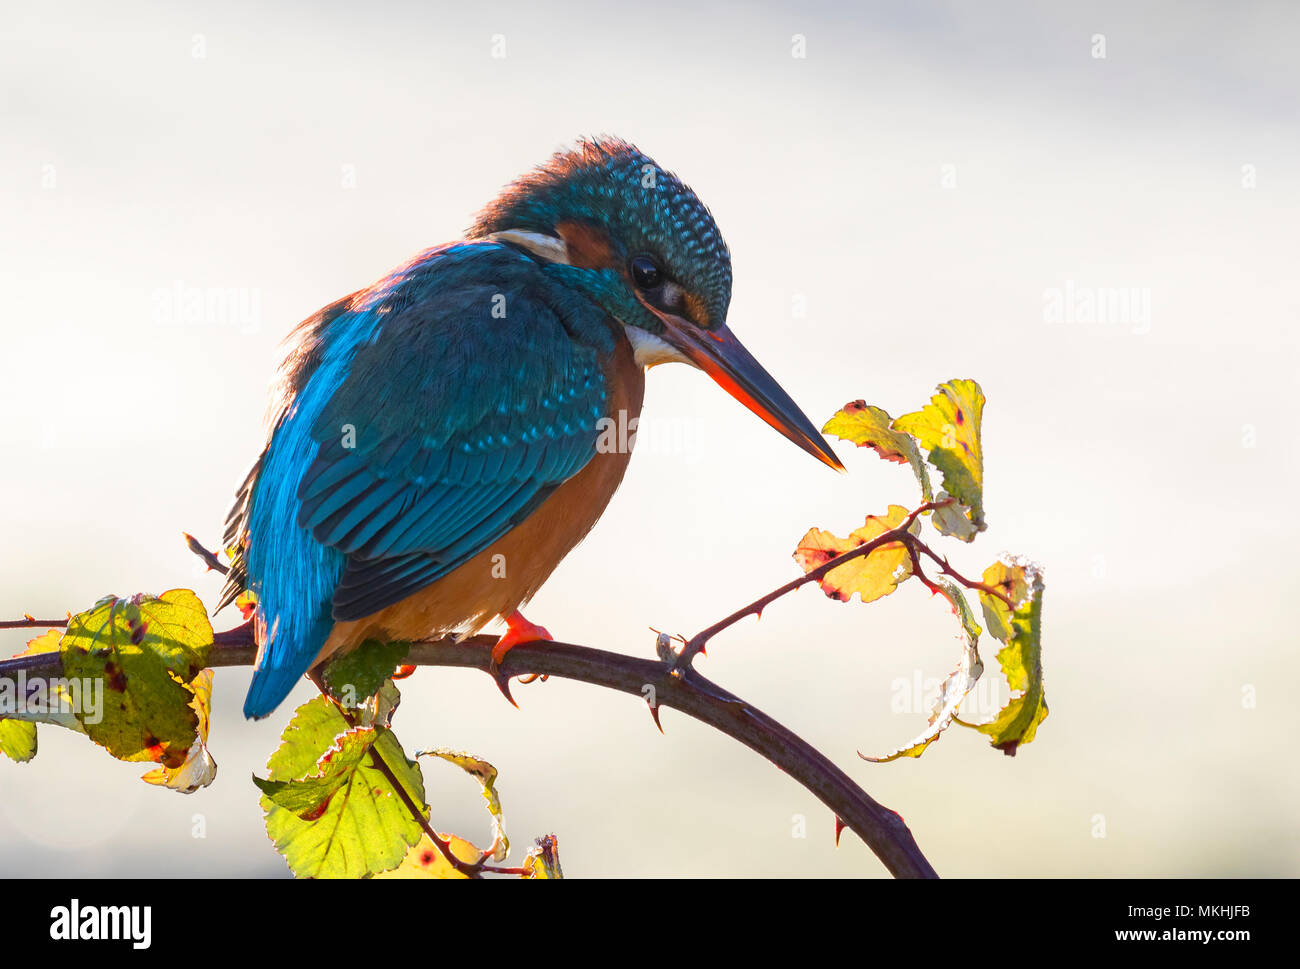 Kingfisher (Alcedo atthis) perched on a bramble, England, Stock Photo